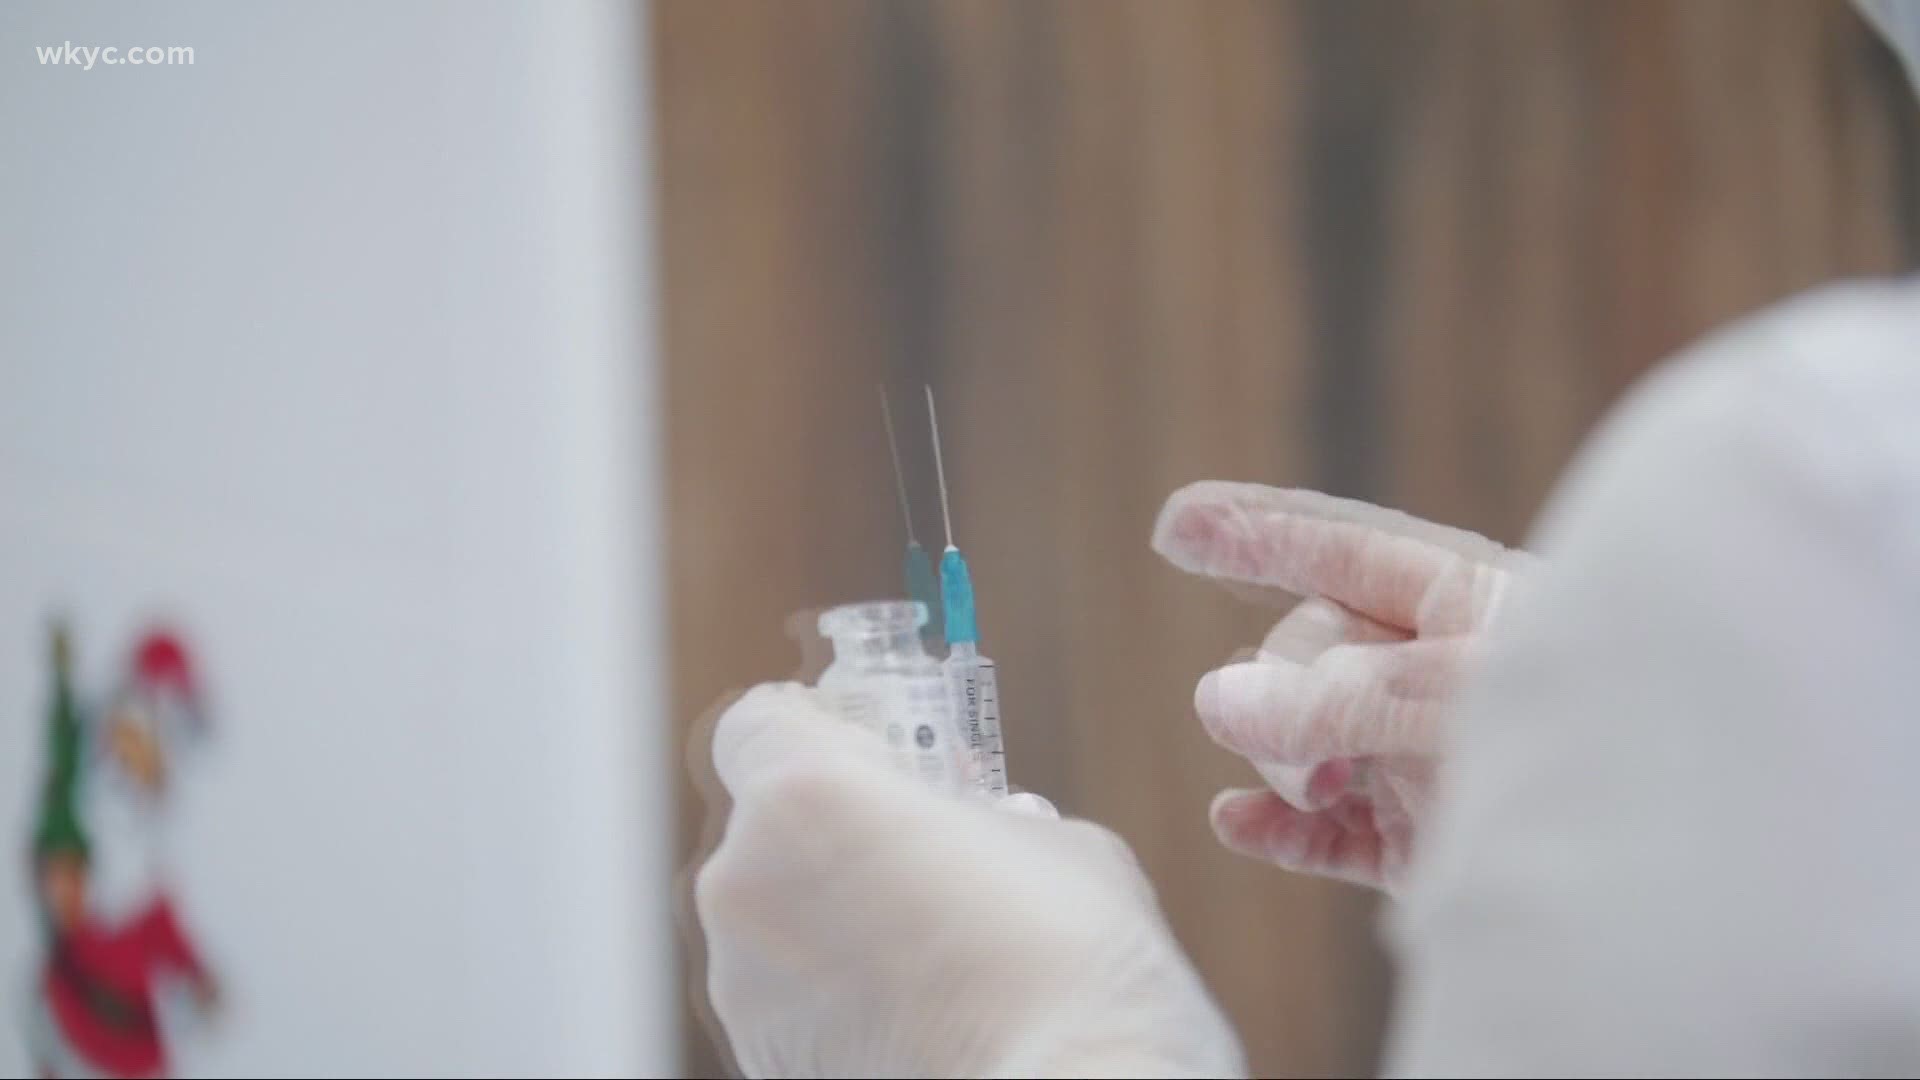 Data obtained by 3News Investigates provides the racial break-down of vaccines being administered at the Wolstein Center in downtown Cleveland.